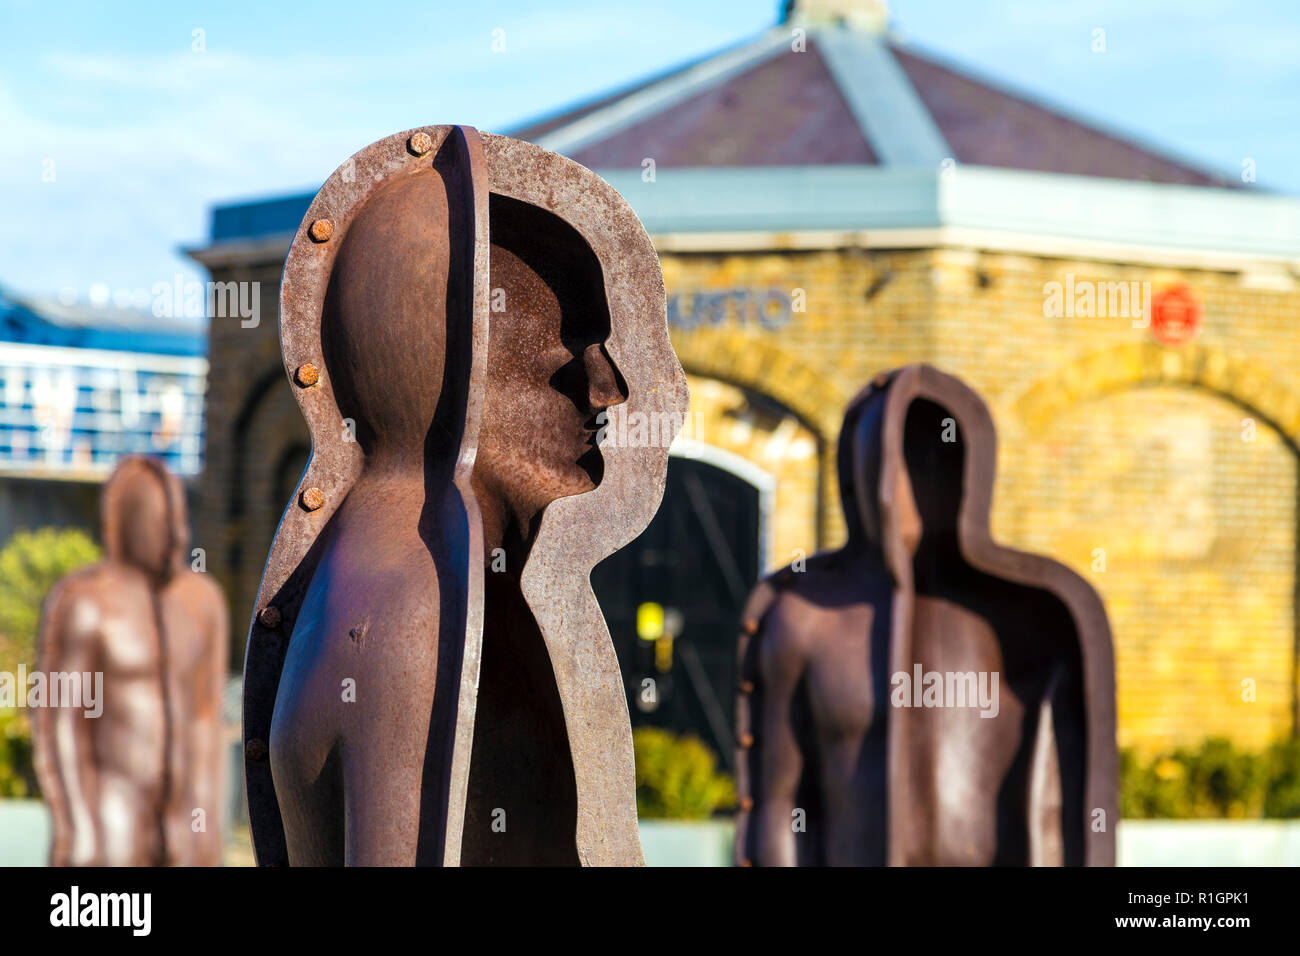 'Assembly' sculpture by Peter Burke in Woolwich, London, UK Stock Photo